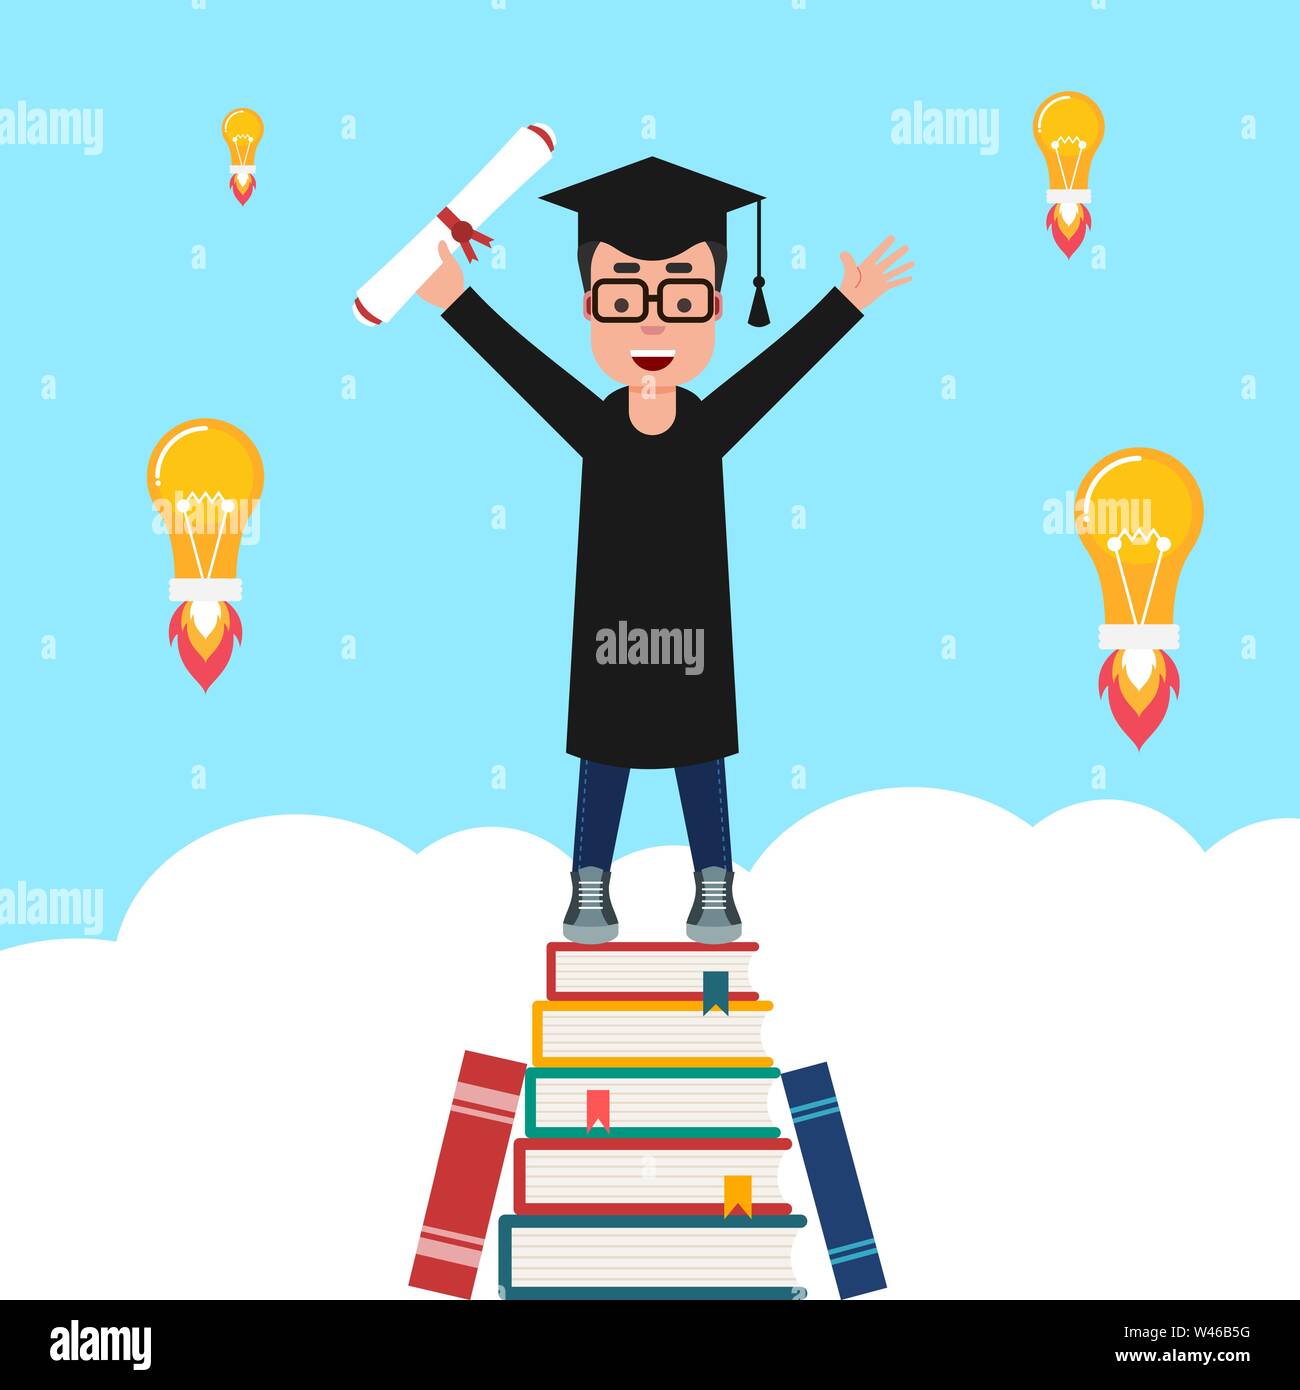 Boy standing on a mountain of books getting ideas. Cheerful student in graduation gown and cap celebrates graduation with a diploma in hand. Vector Stock Vector